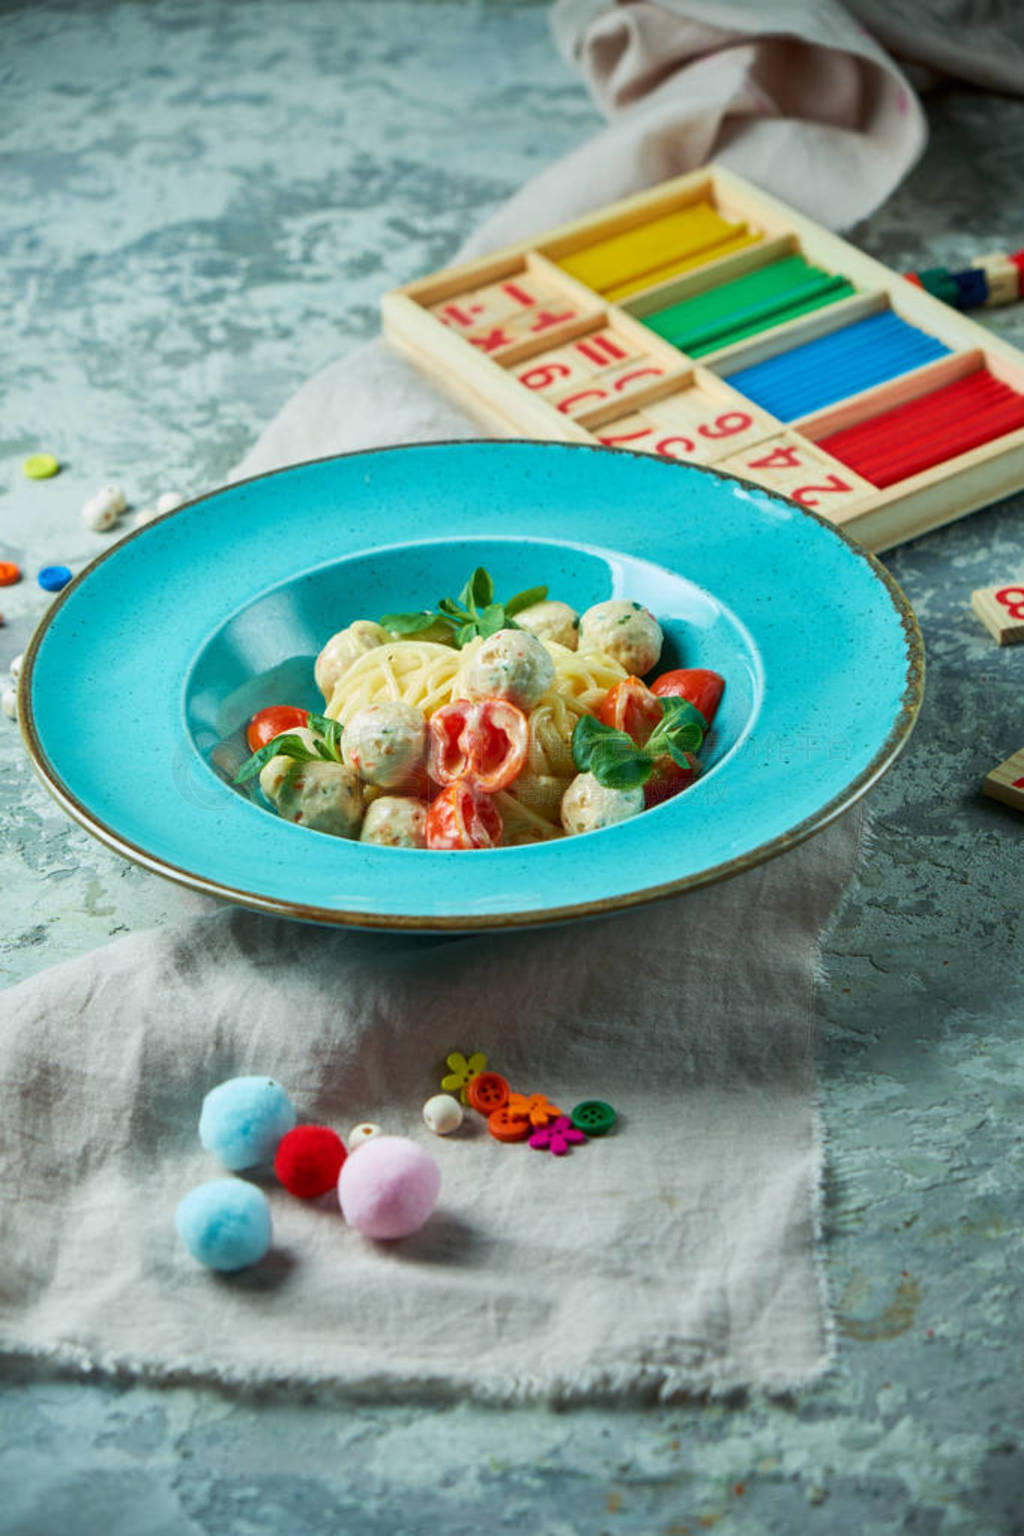 Childrens pasta with meatballs and basil among childrens toys